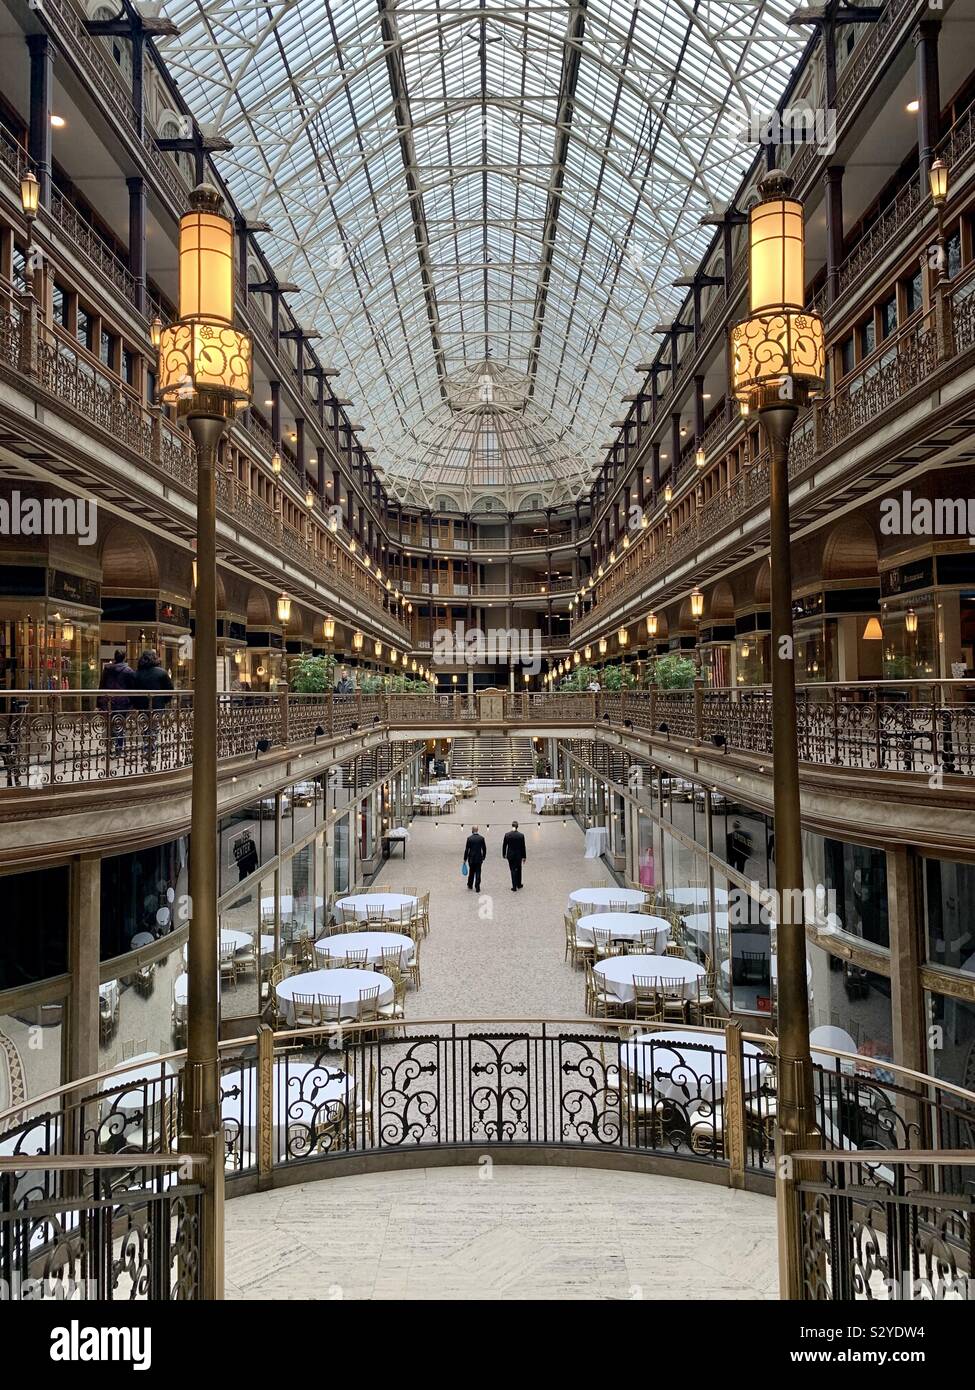 The Hyatt Regency Arcade hotel in Cleveland Ohio. Built in 1890. Breathtaking architecture and history. Stock Photo